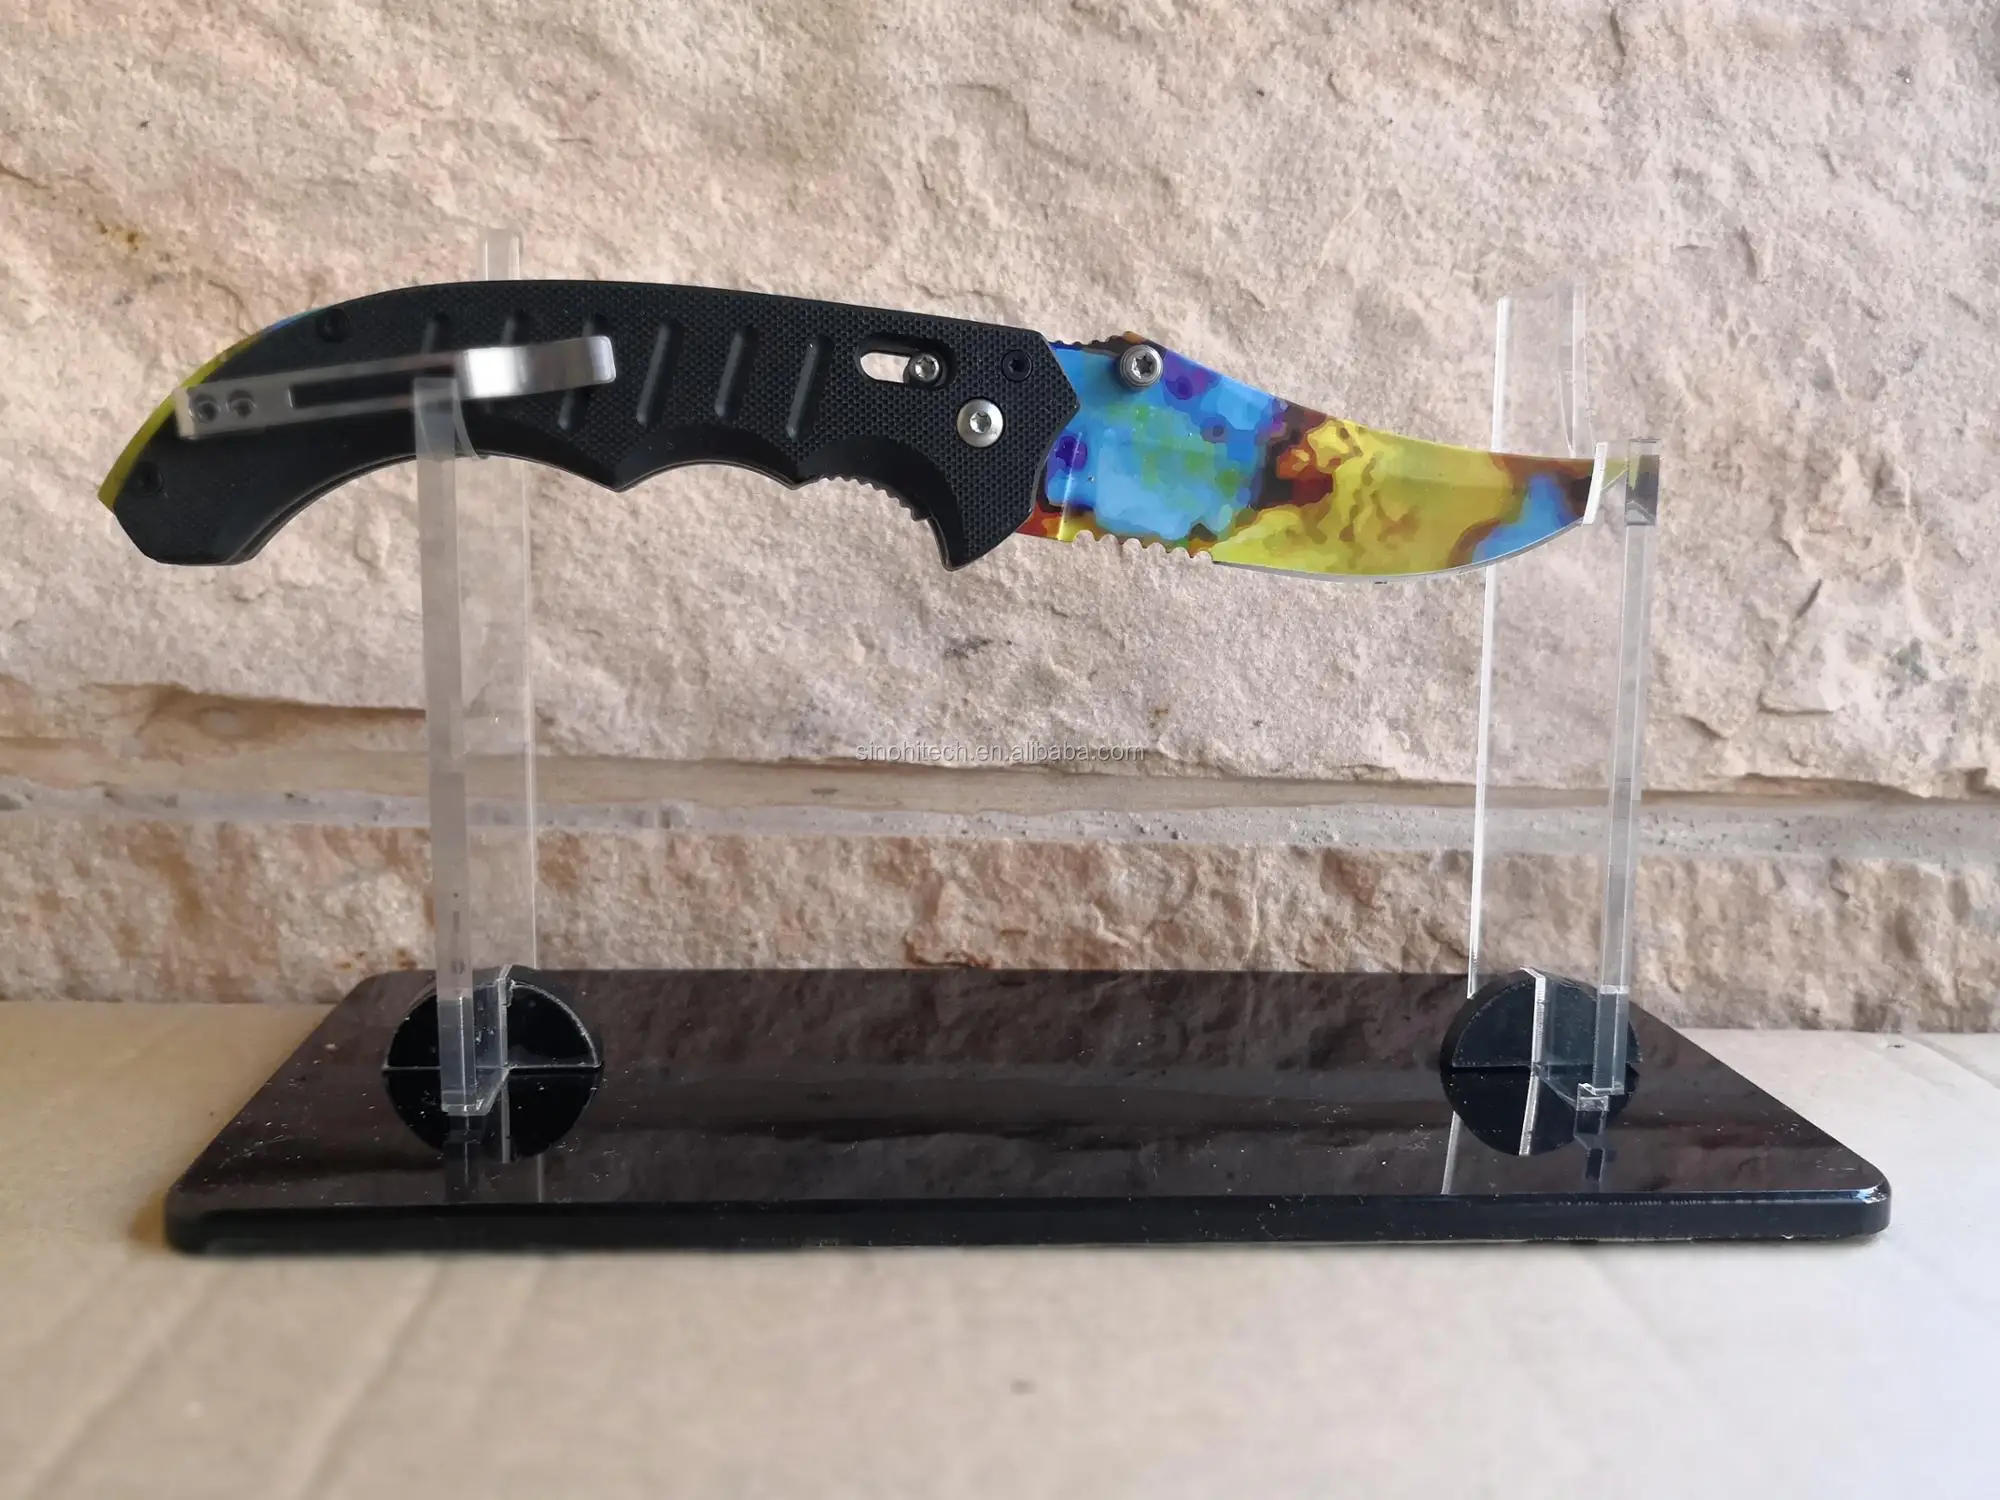 Universal Display Stand For All Cs Go Game Knives Butterfly Huntsman Karambit Flip Falchion M9 Knives Buy Cs Go Game Knife Stand Csgo Knife Display Butterfly Trainer Display Product On Alibaba Com